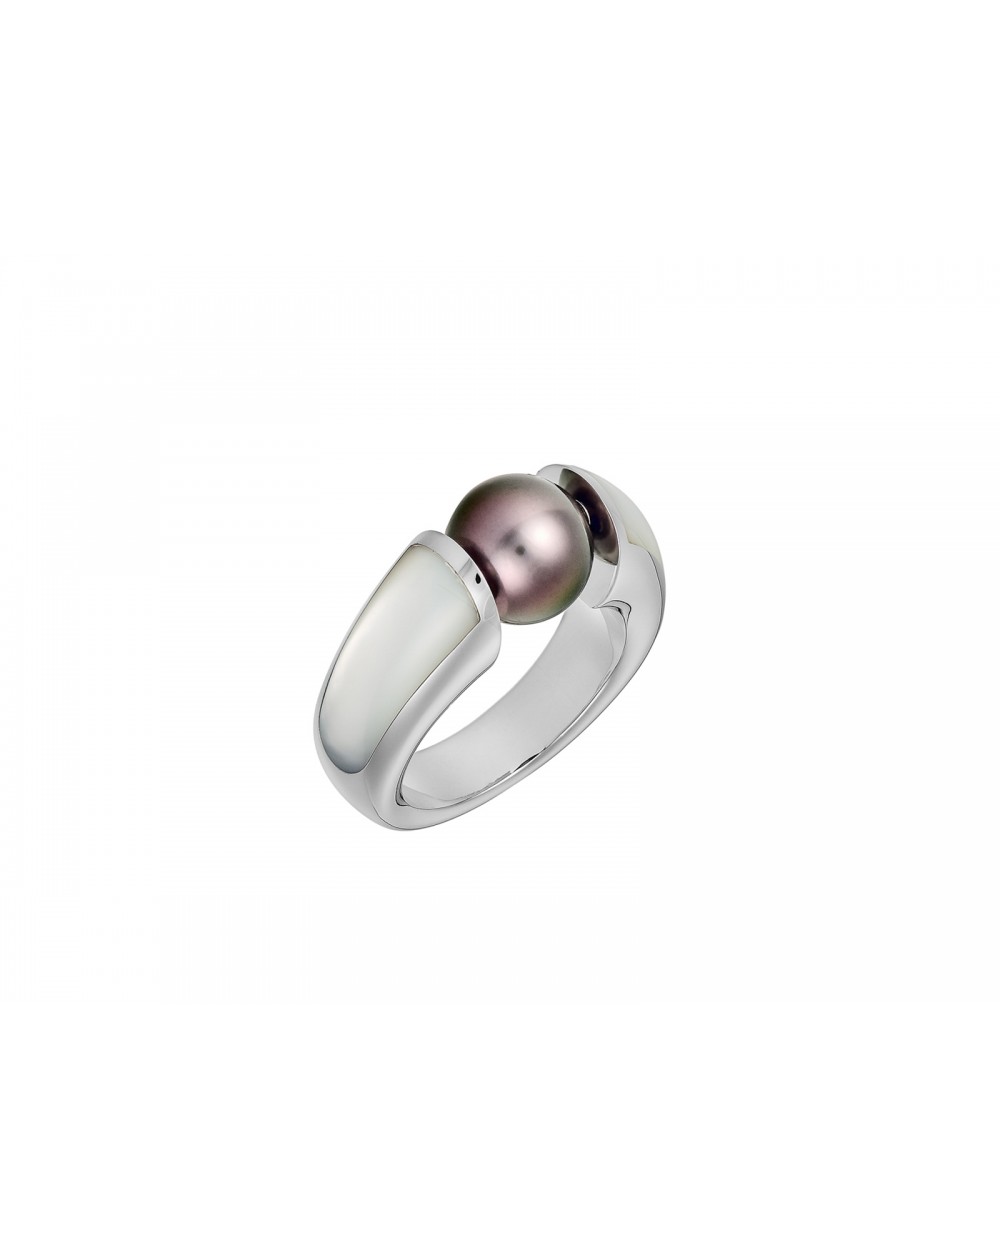 BOUGAINVILLE ring with slender profile